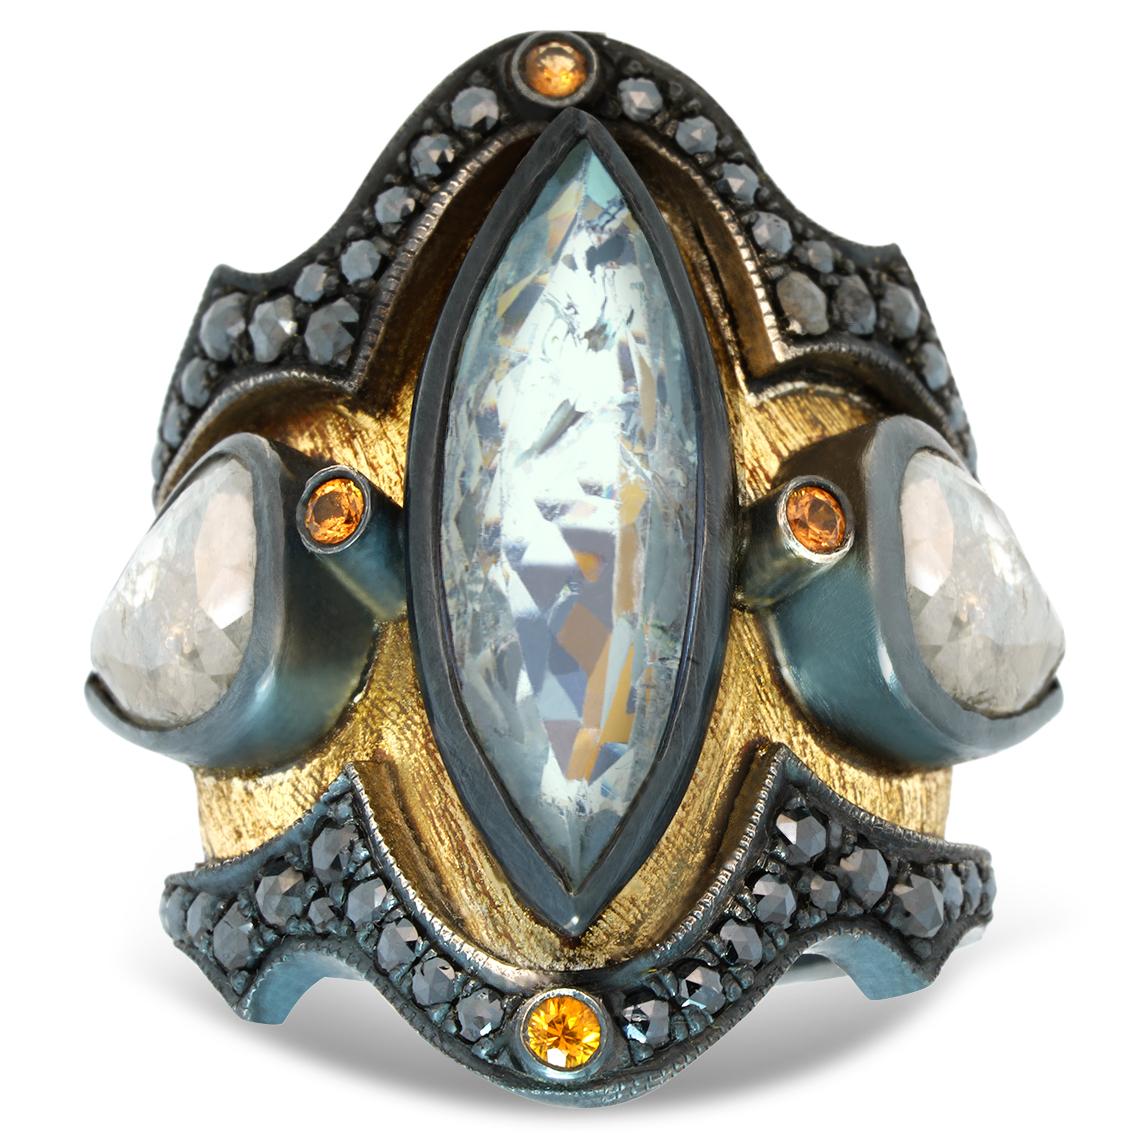 AQUAMARINE MEDIEVAL RING

The Aquamarine Medieval Ring is a one of a kind, elaborate piece. This exquisite ring is truly breathtaking. Timeless and classic yet striking and bold, this stunning ring is an ode to Medieval beauty.

This spectacular